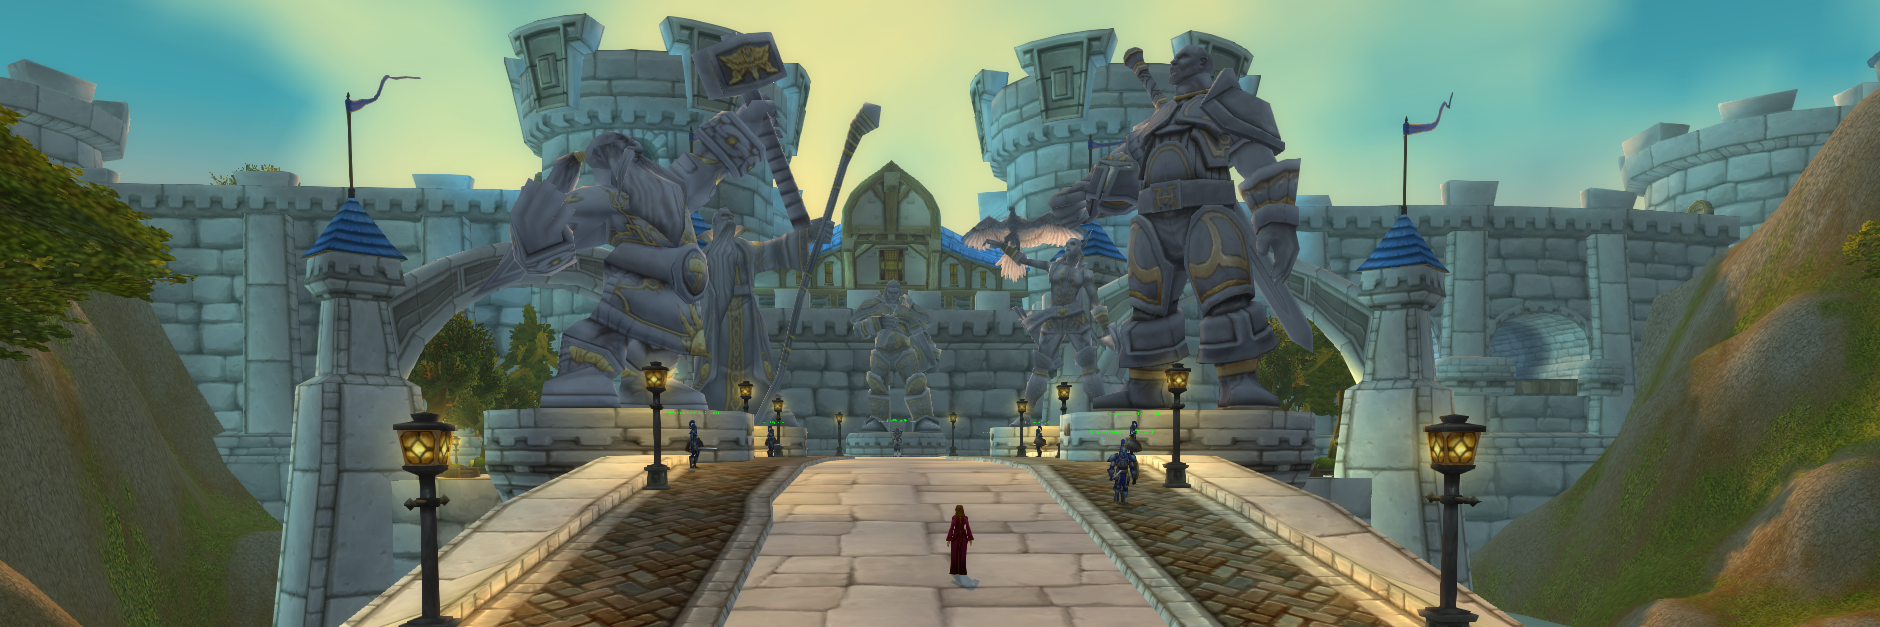 This is the entrance to the Alliance city Stormwind. Image by Jana Allmand-Zeman